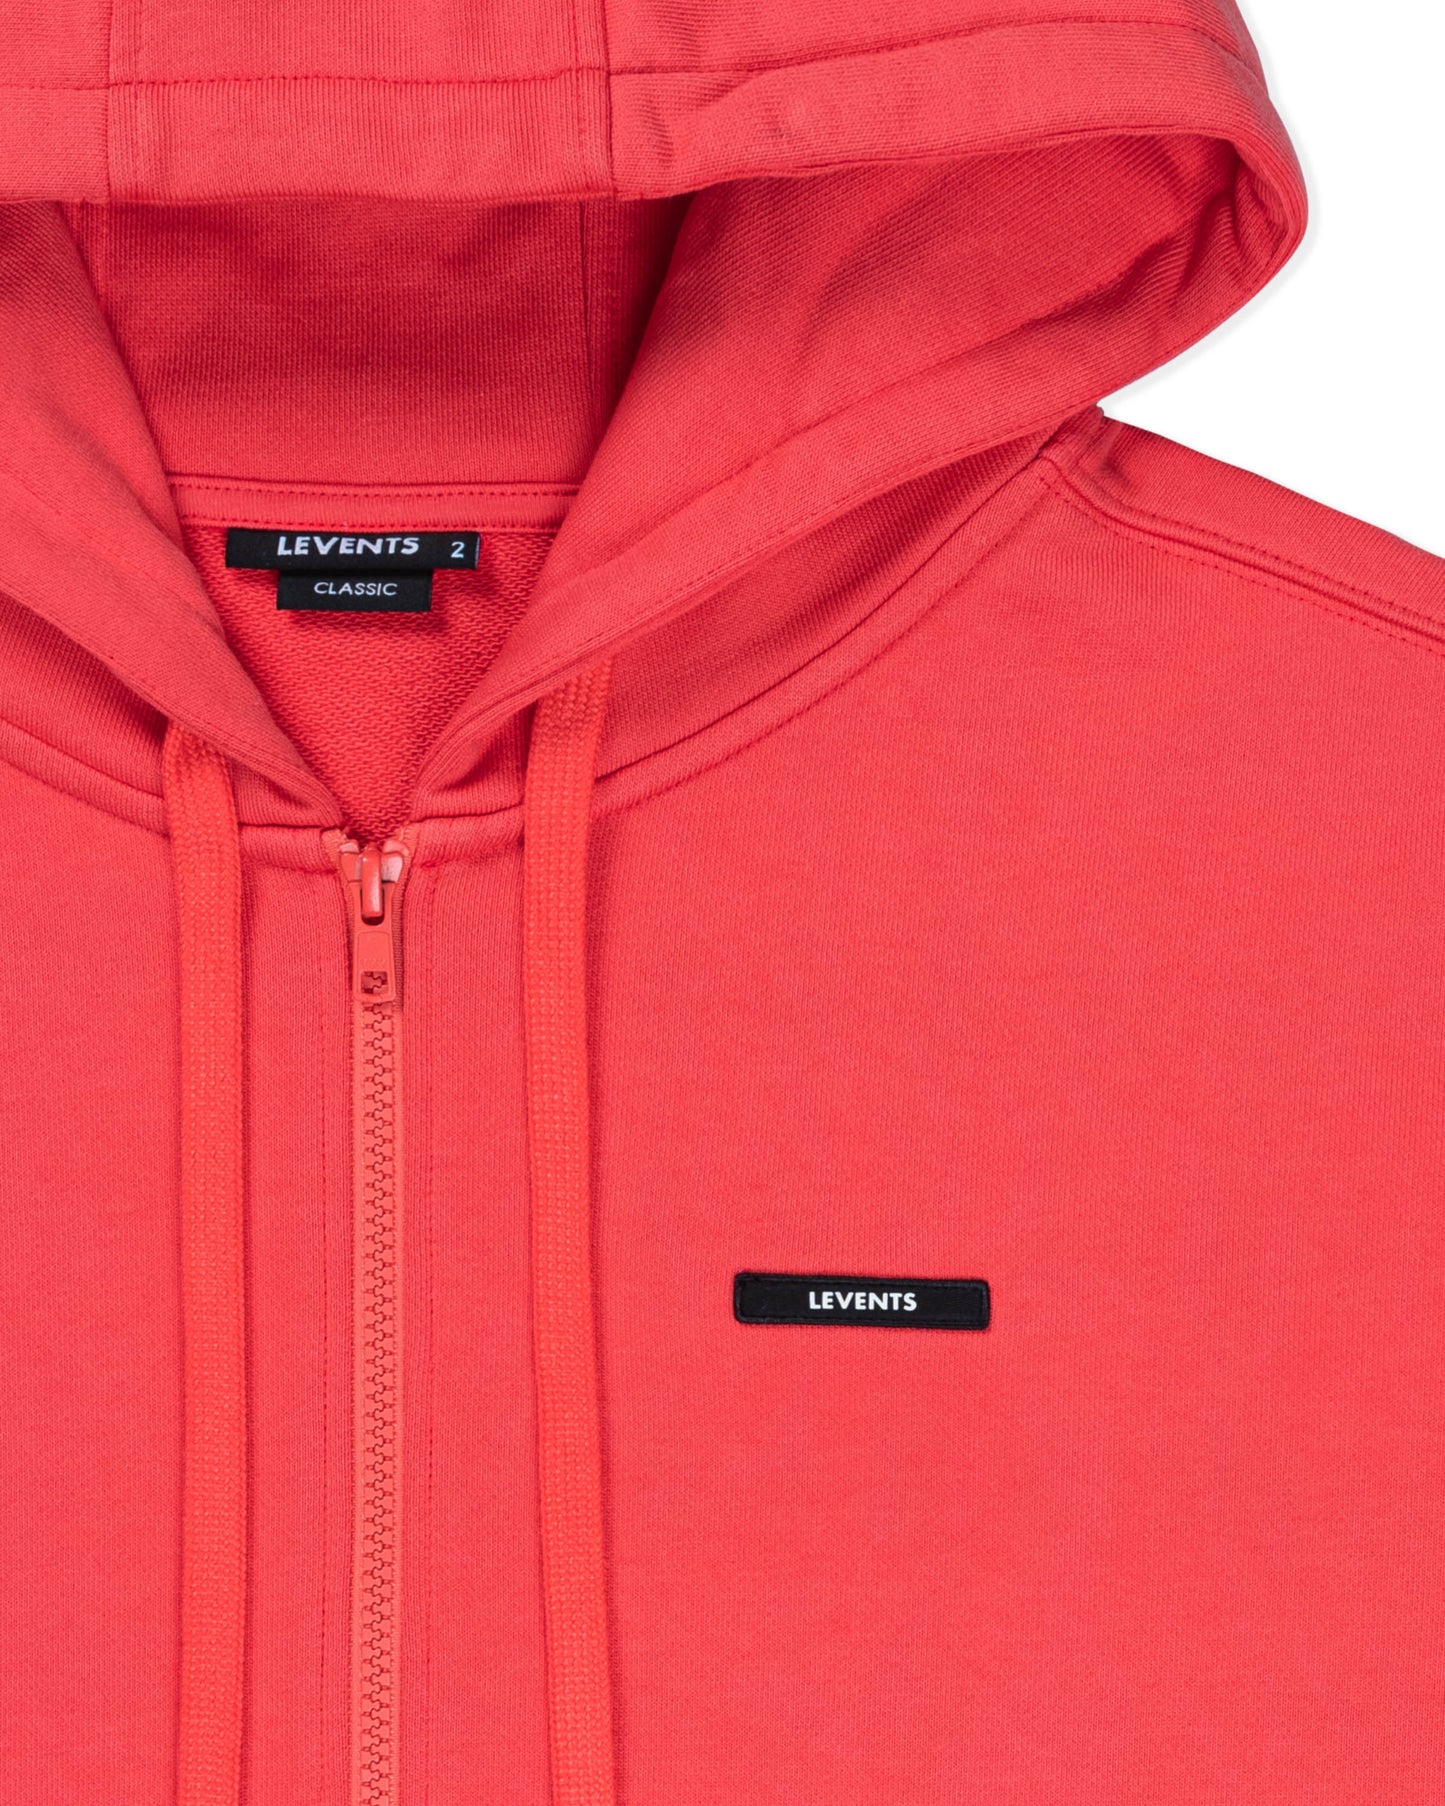 Levents® Classic Zipper Hoodie/ Red Coral